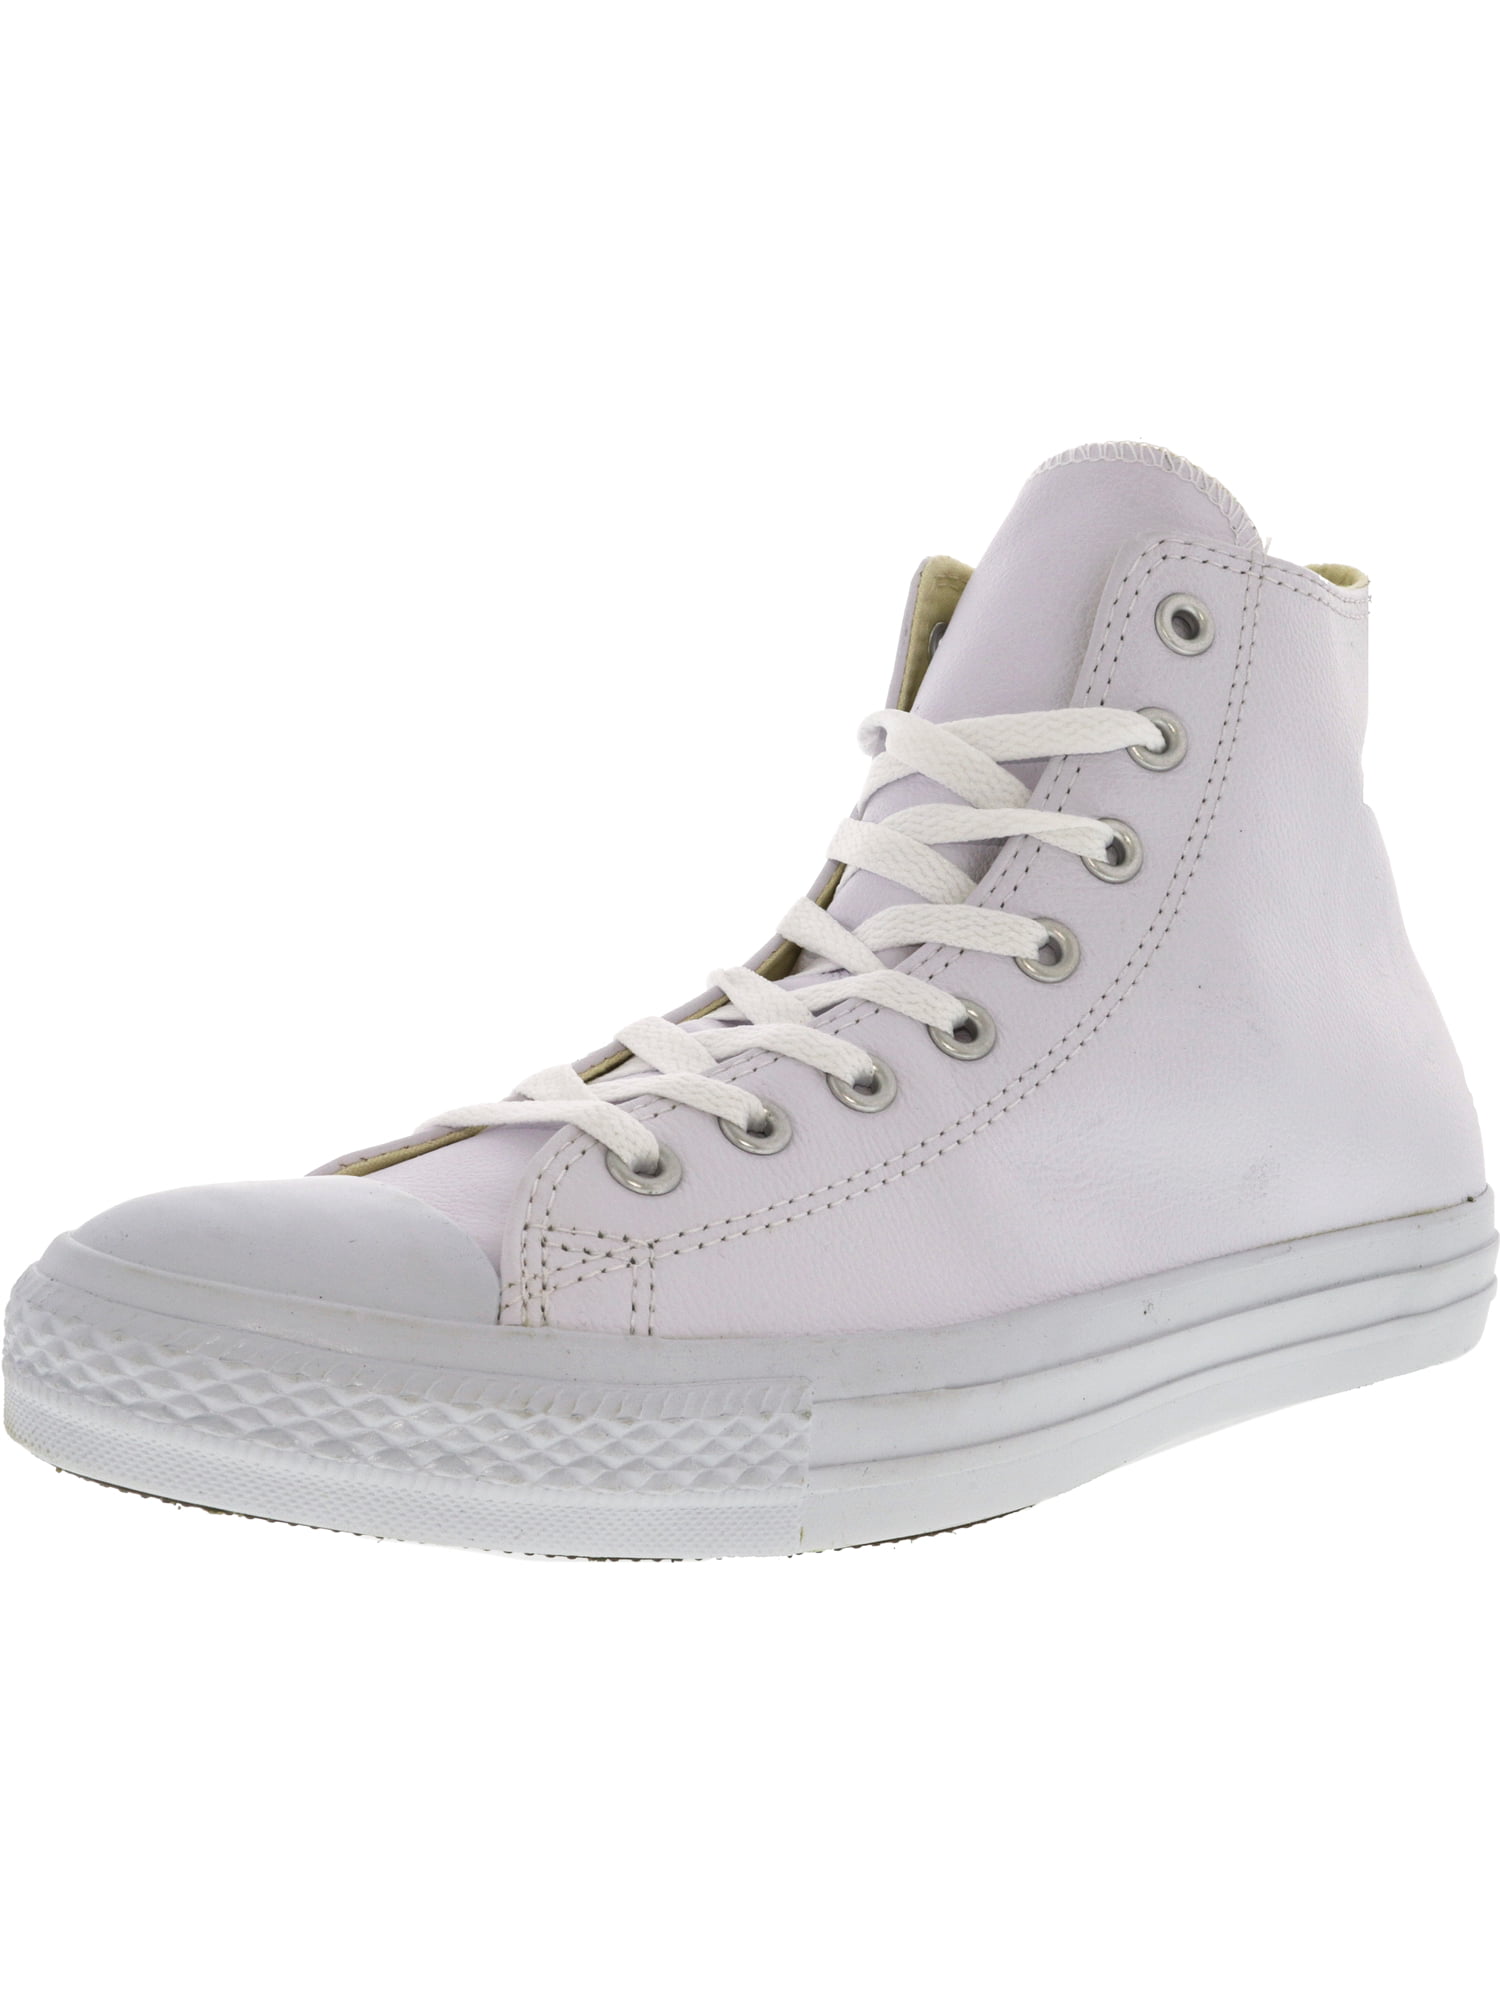 dobbelt to uger stun Converse Chuck Taylor All Star Hi Leather Sneakers White Mono - Walmart.com